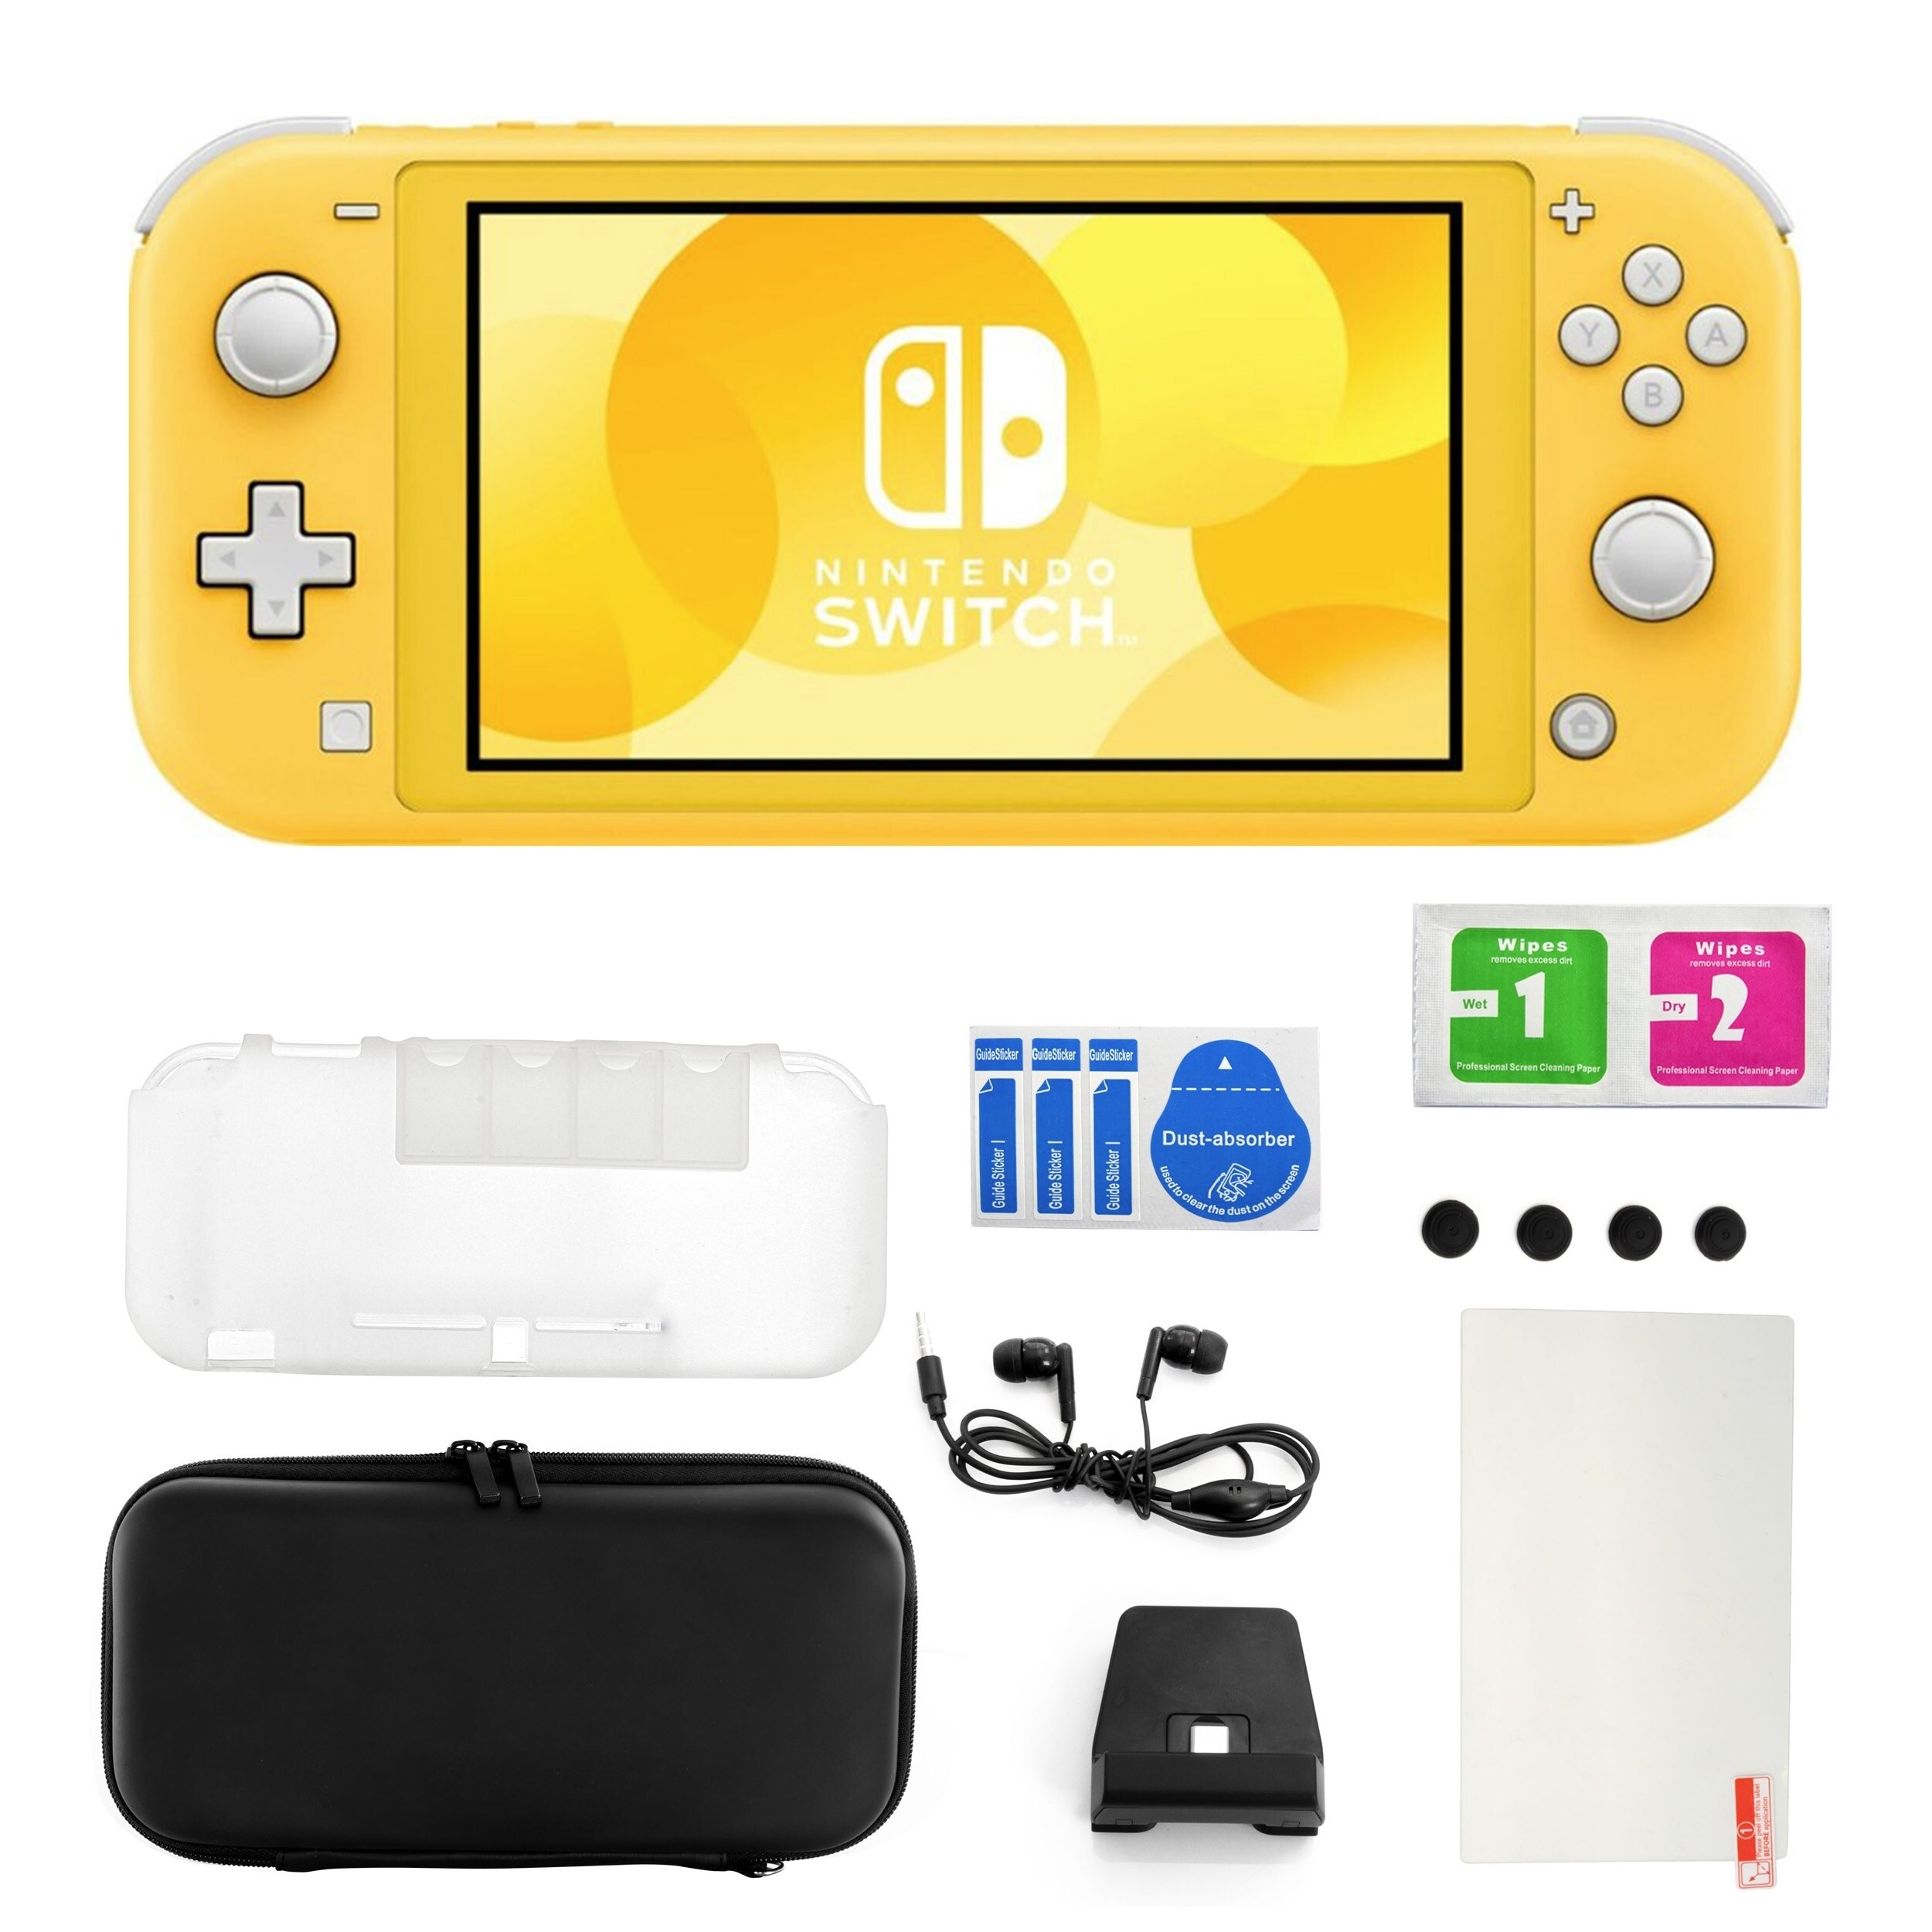 just dance 2020 for nintendo switch lite